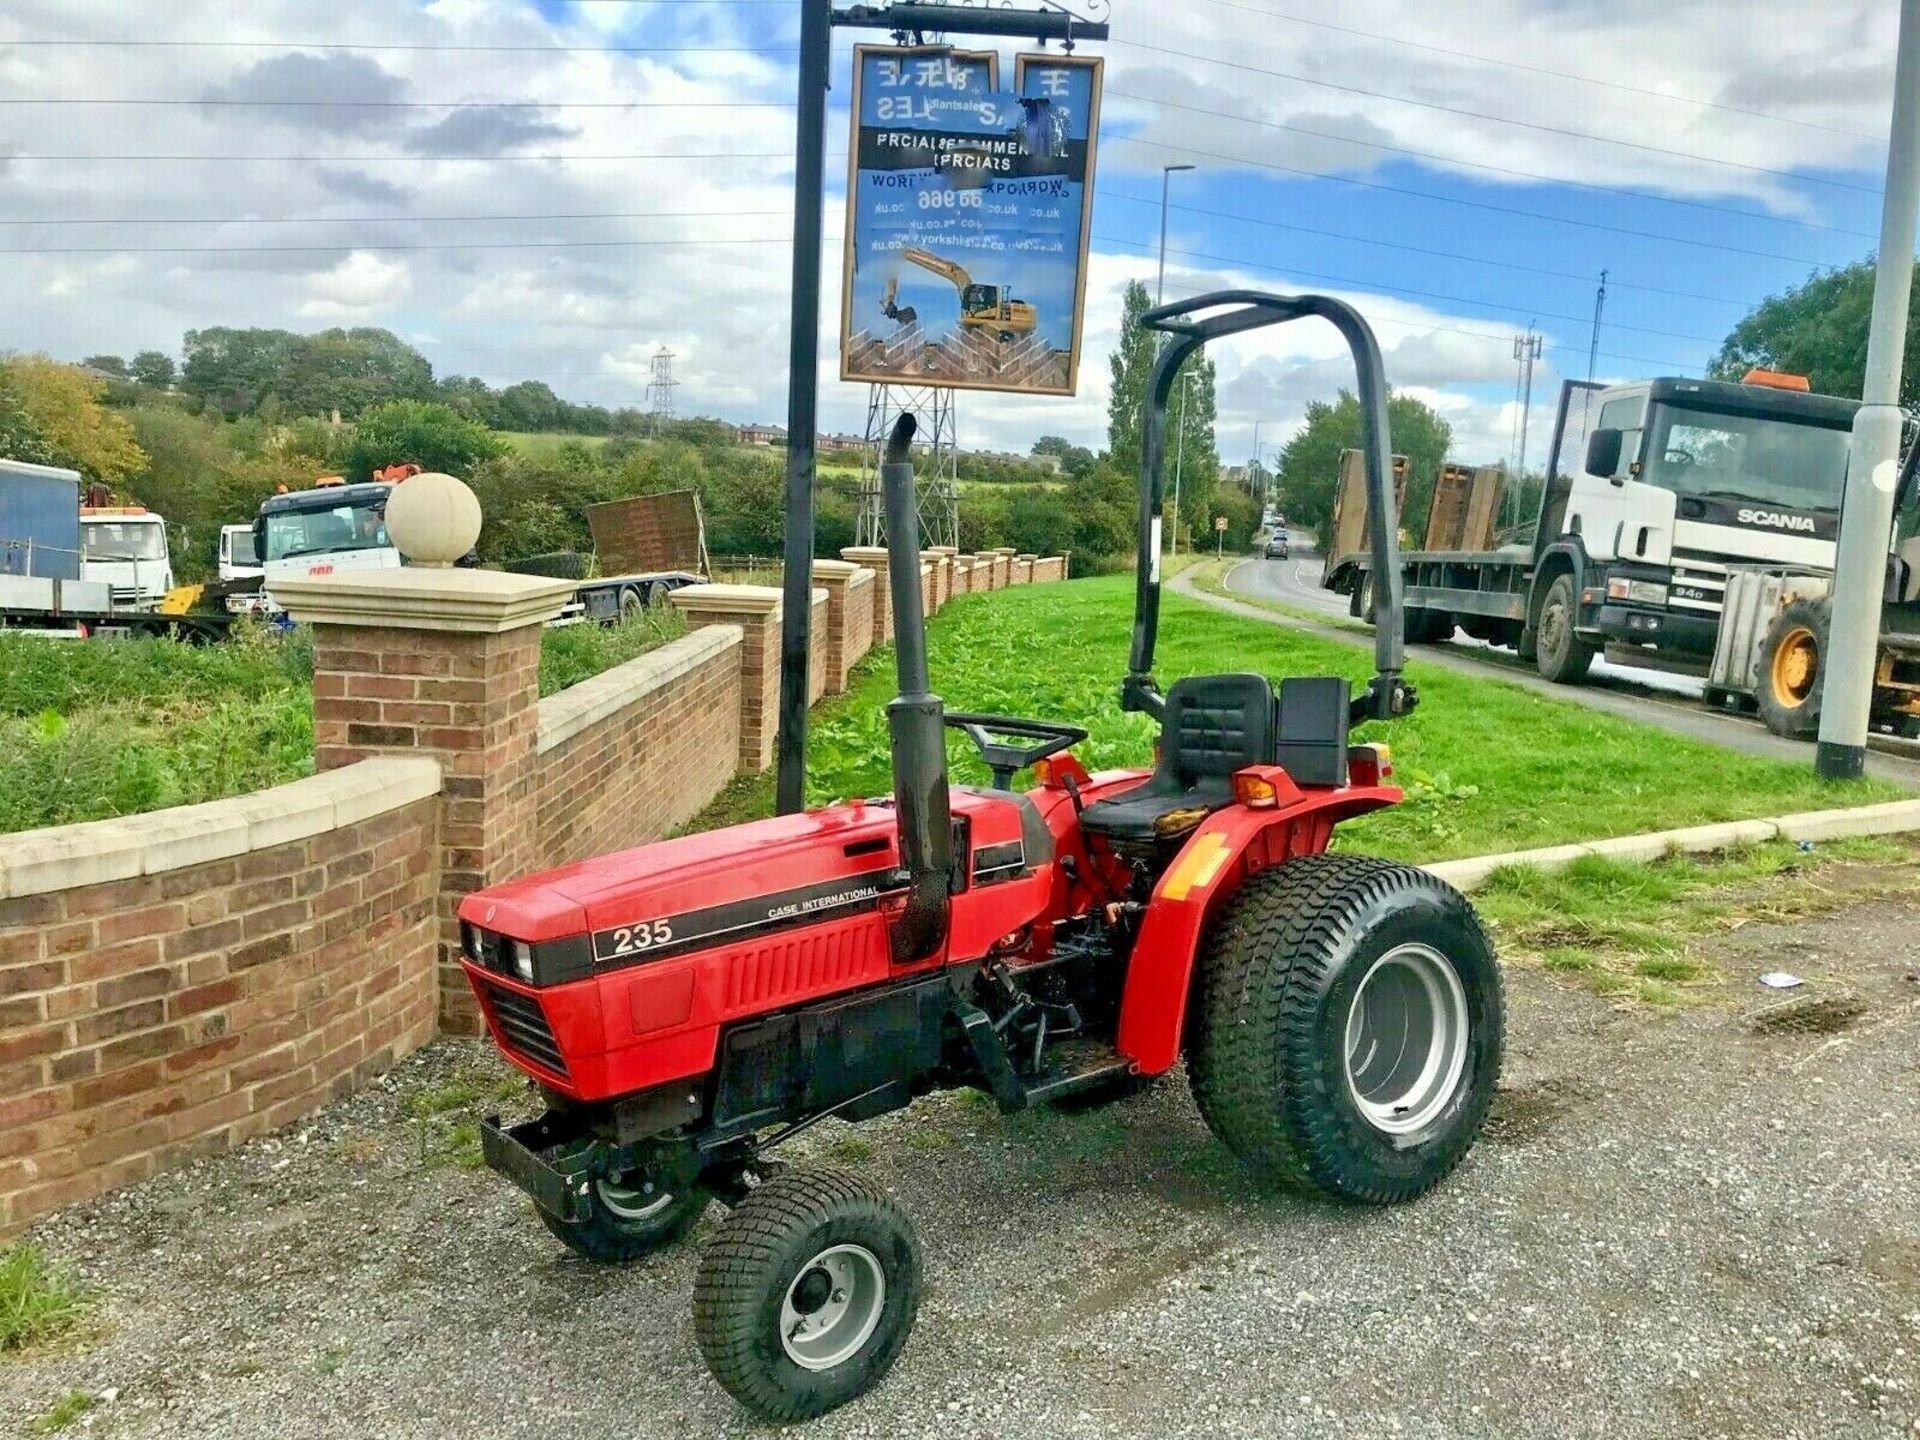 Case International 234 Compact Tractor - Image 10 of 10